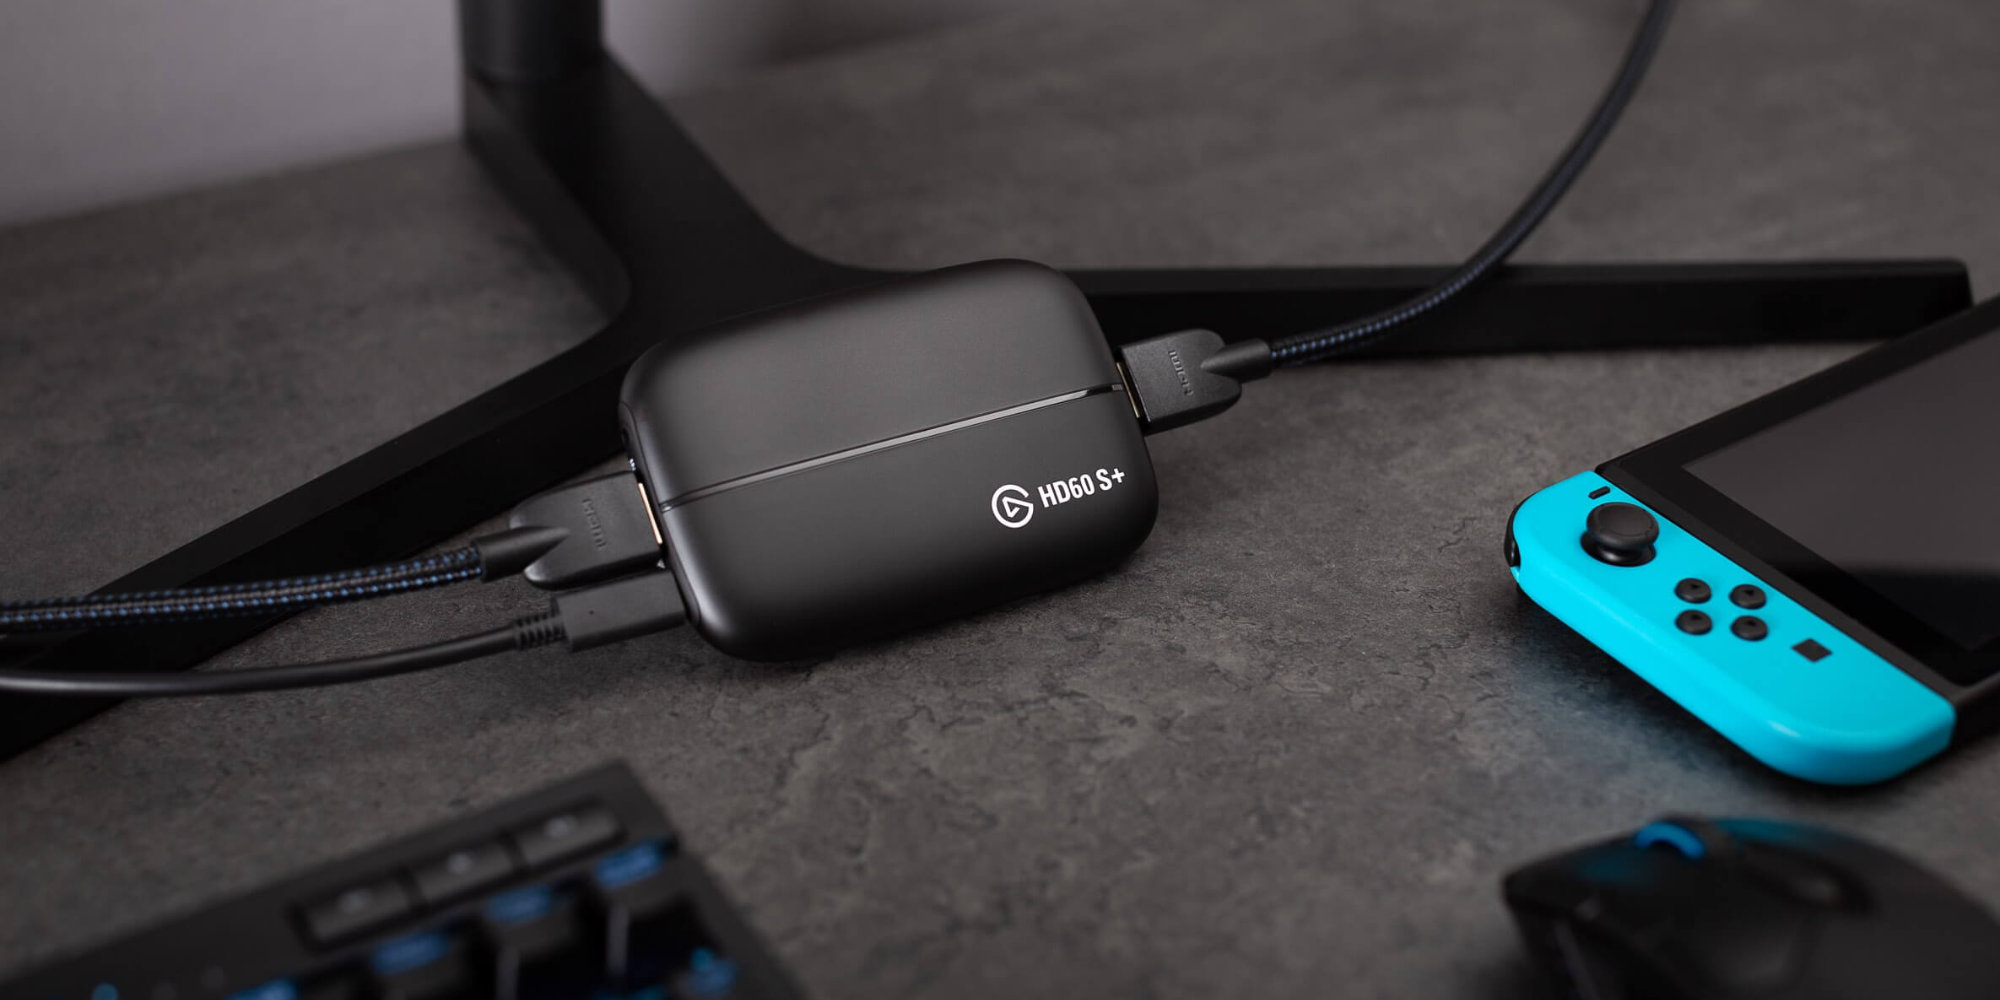 Elgato's HD60 S+ capture card with 4K60 passthrough sees new low